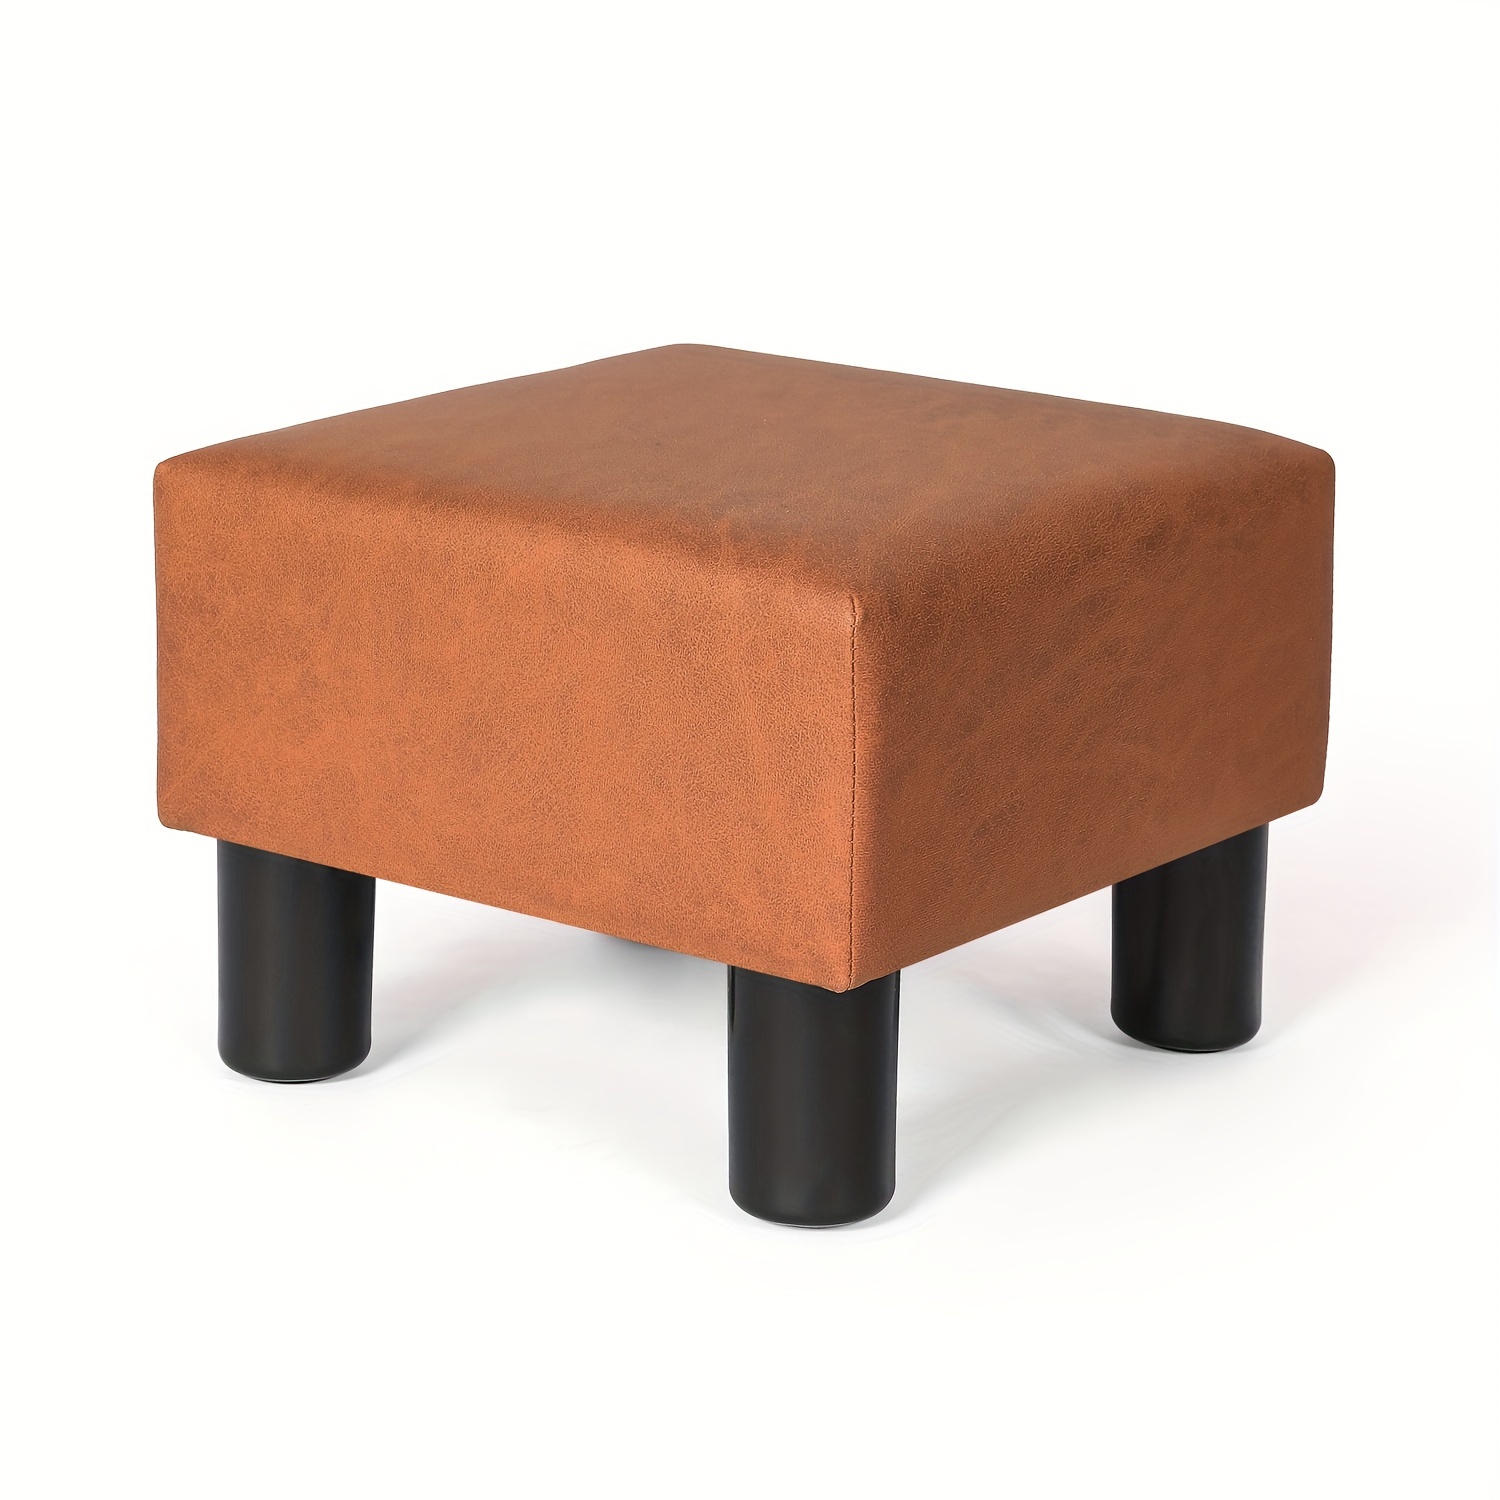 

Small Square Orange Ottoman Leather Footstool Modern Soft Padded Footrest-small Step Stool For Living Room, Office